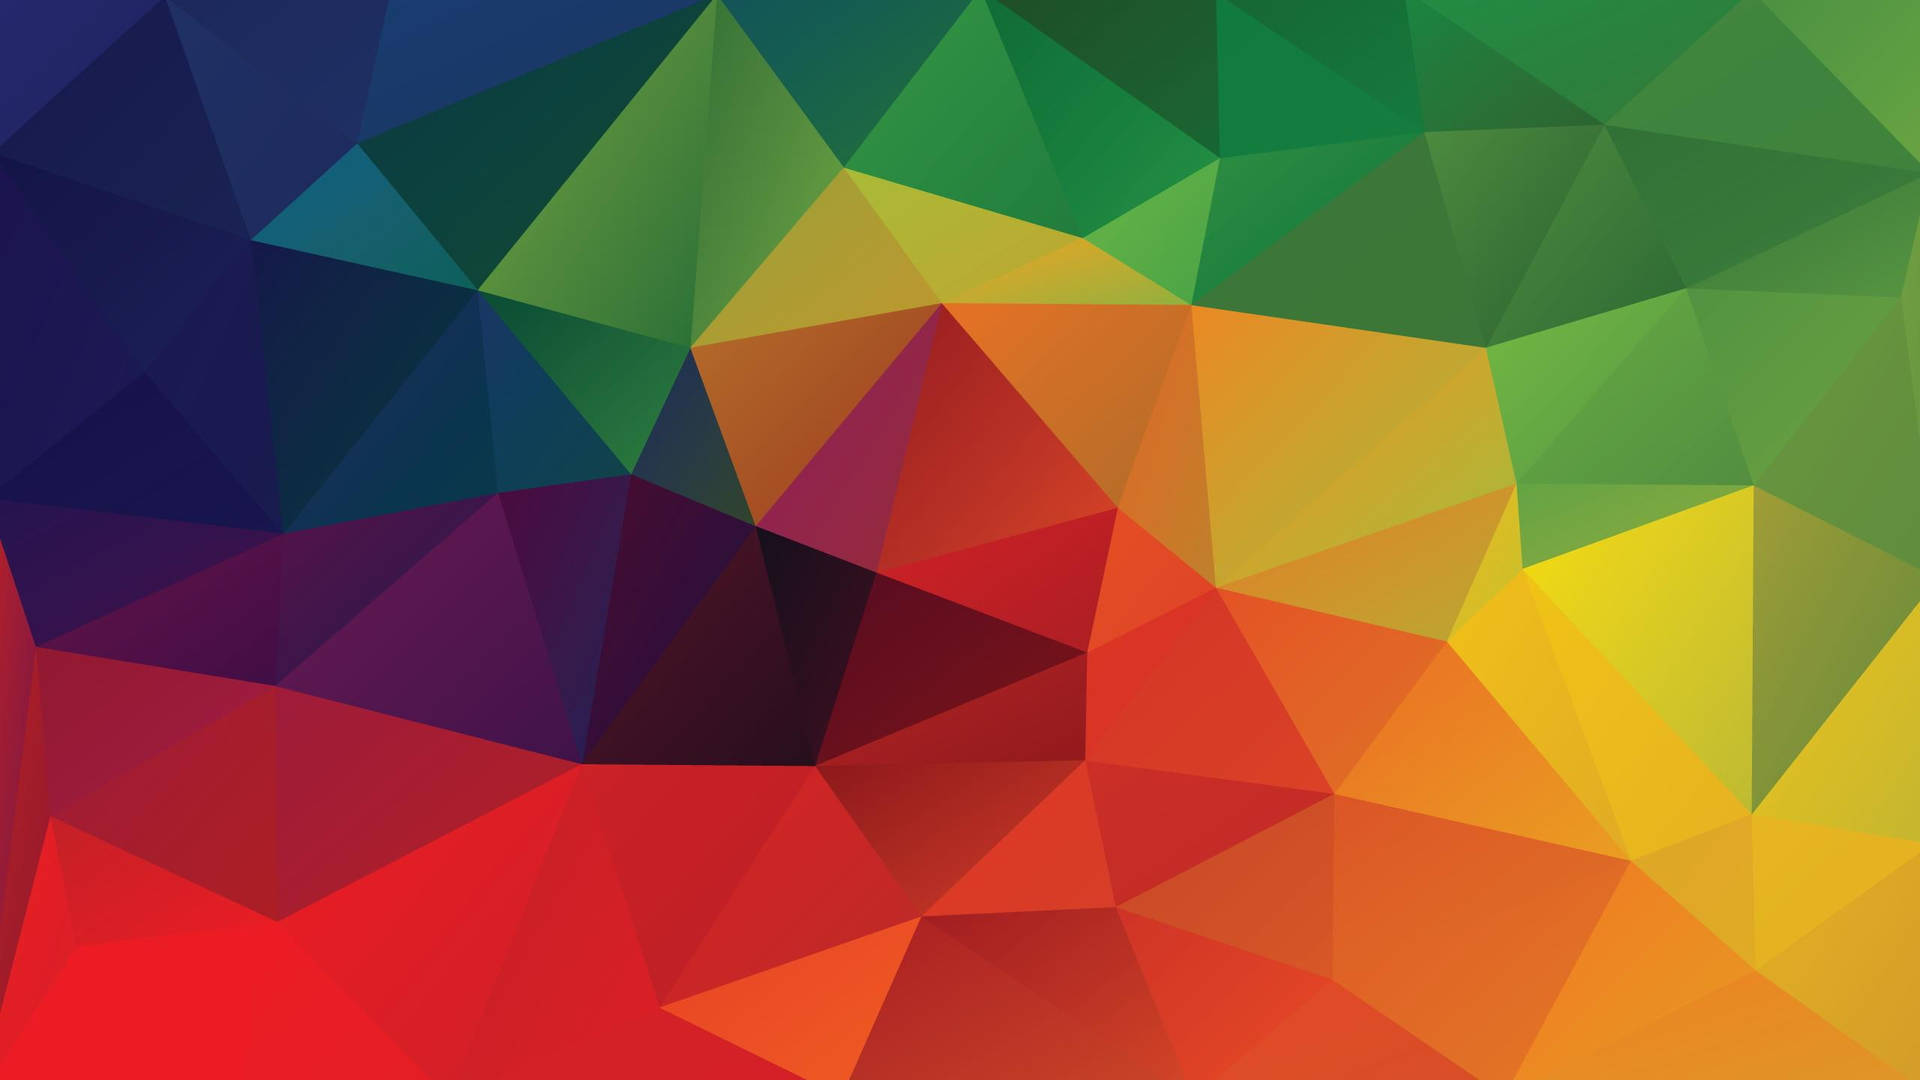 Colorful Platonic Solid Abstract Art Wallpaper